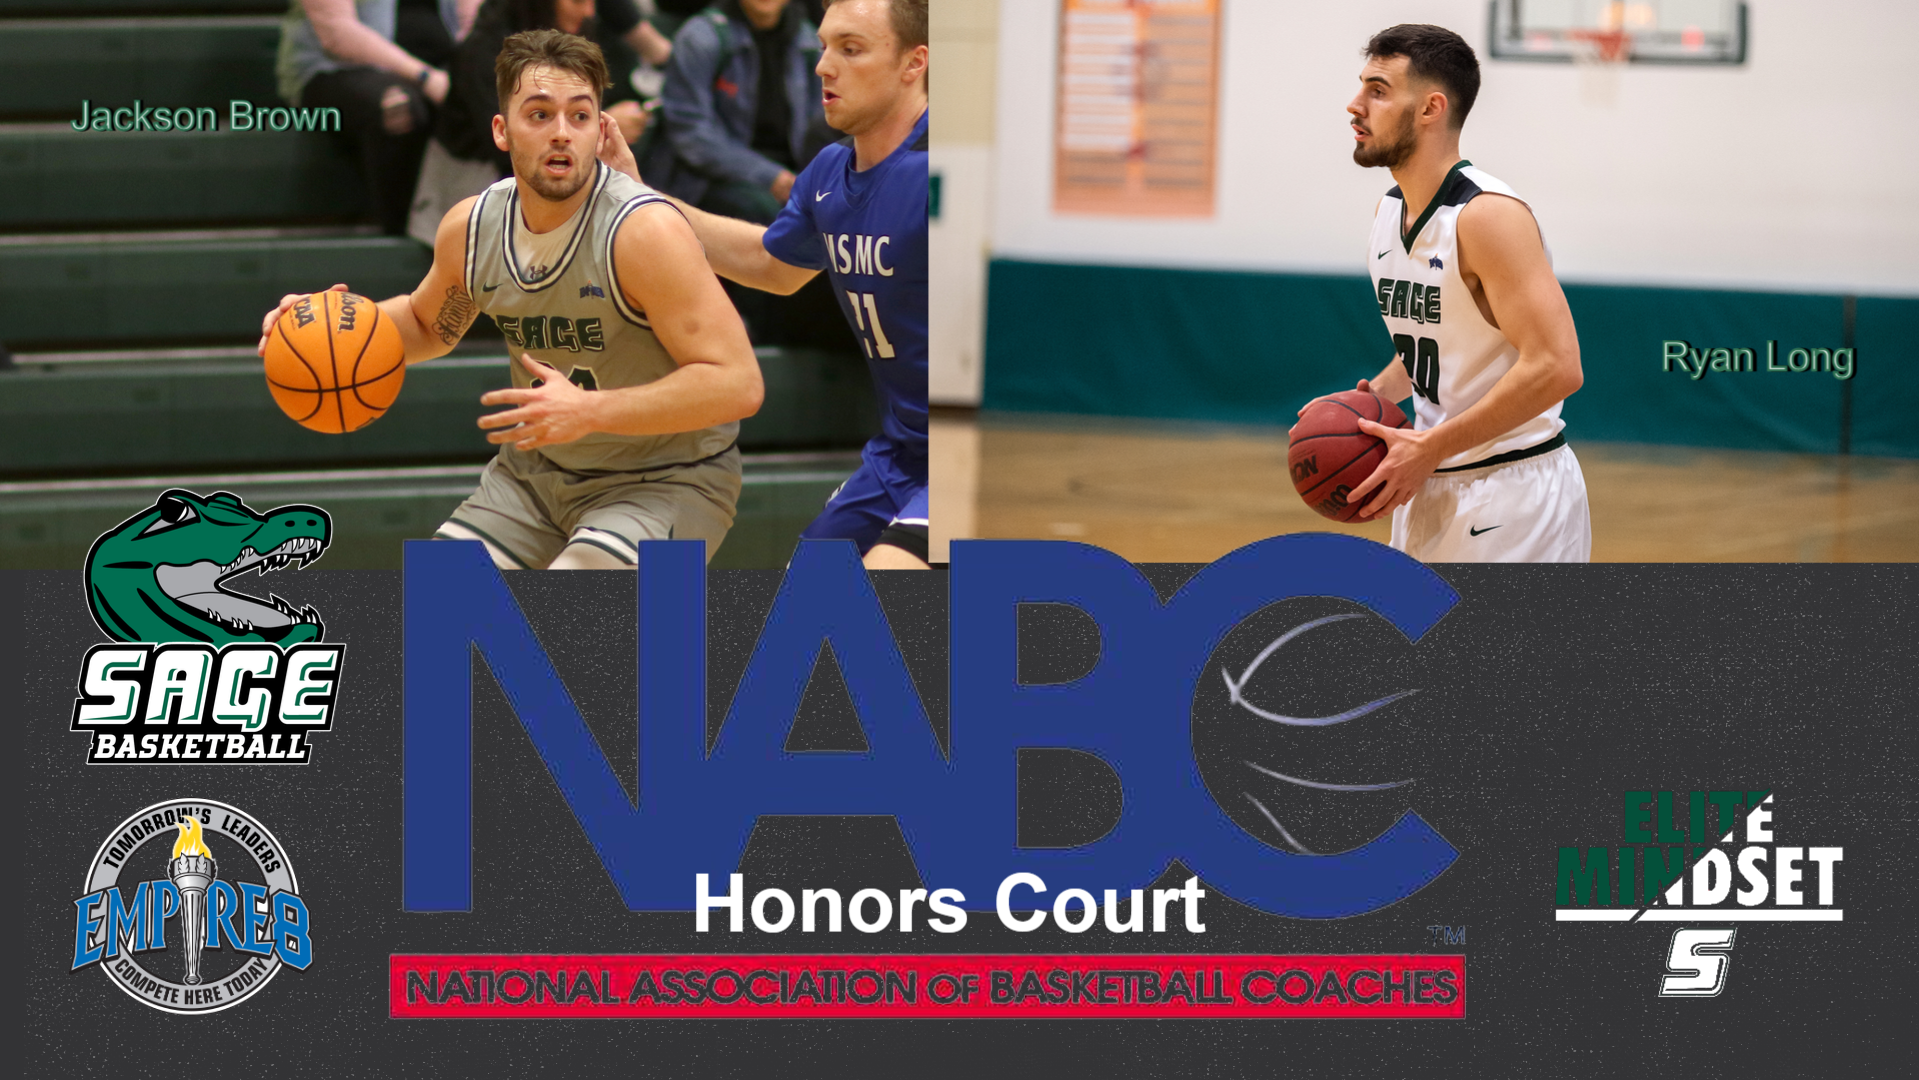 RSC Men's Basketball honored by NABC